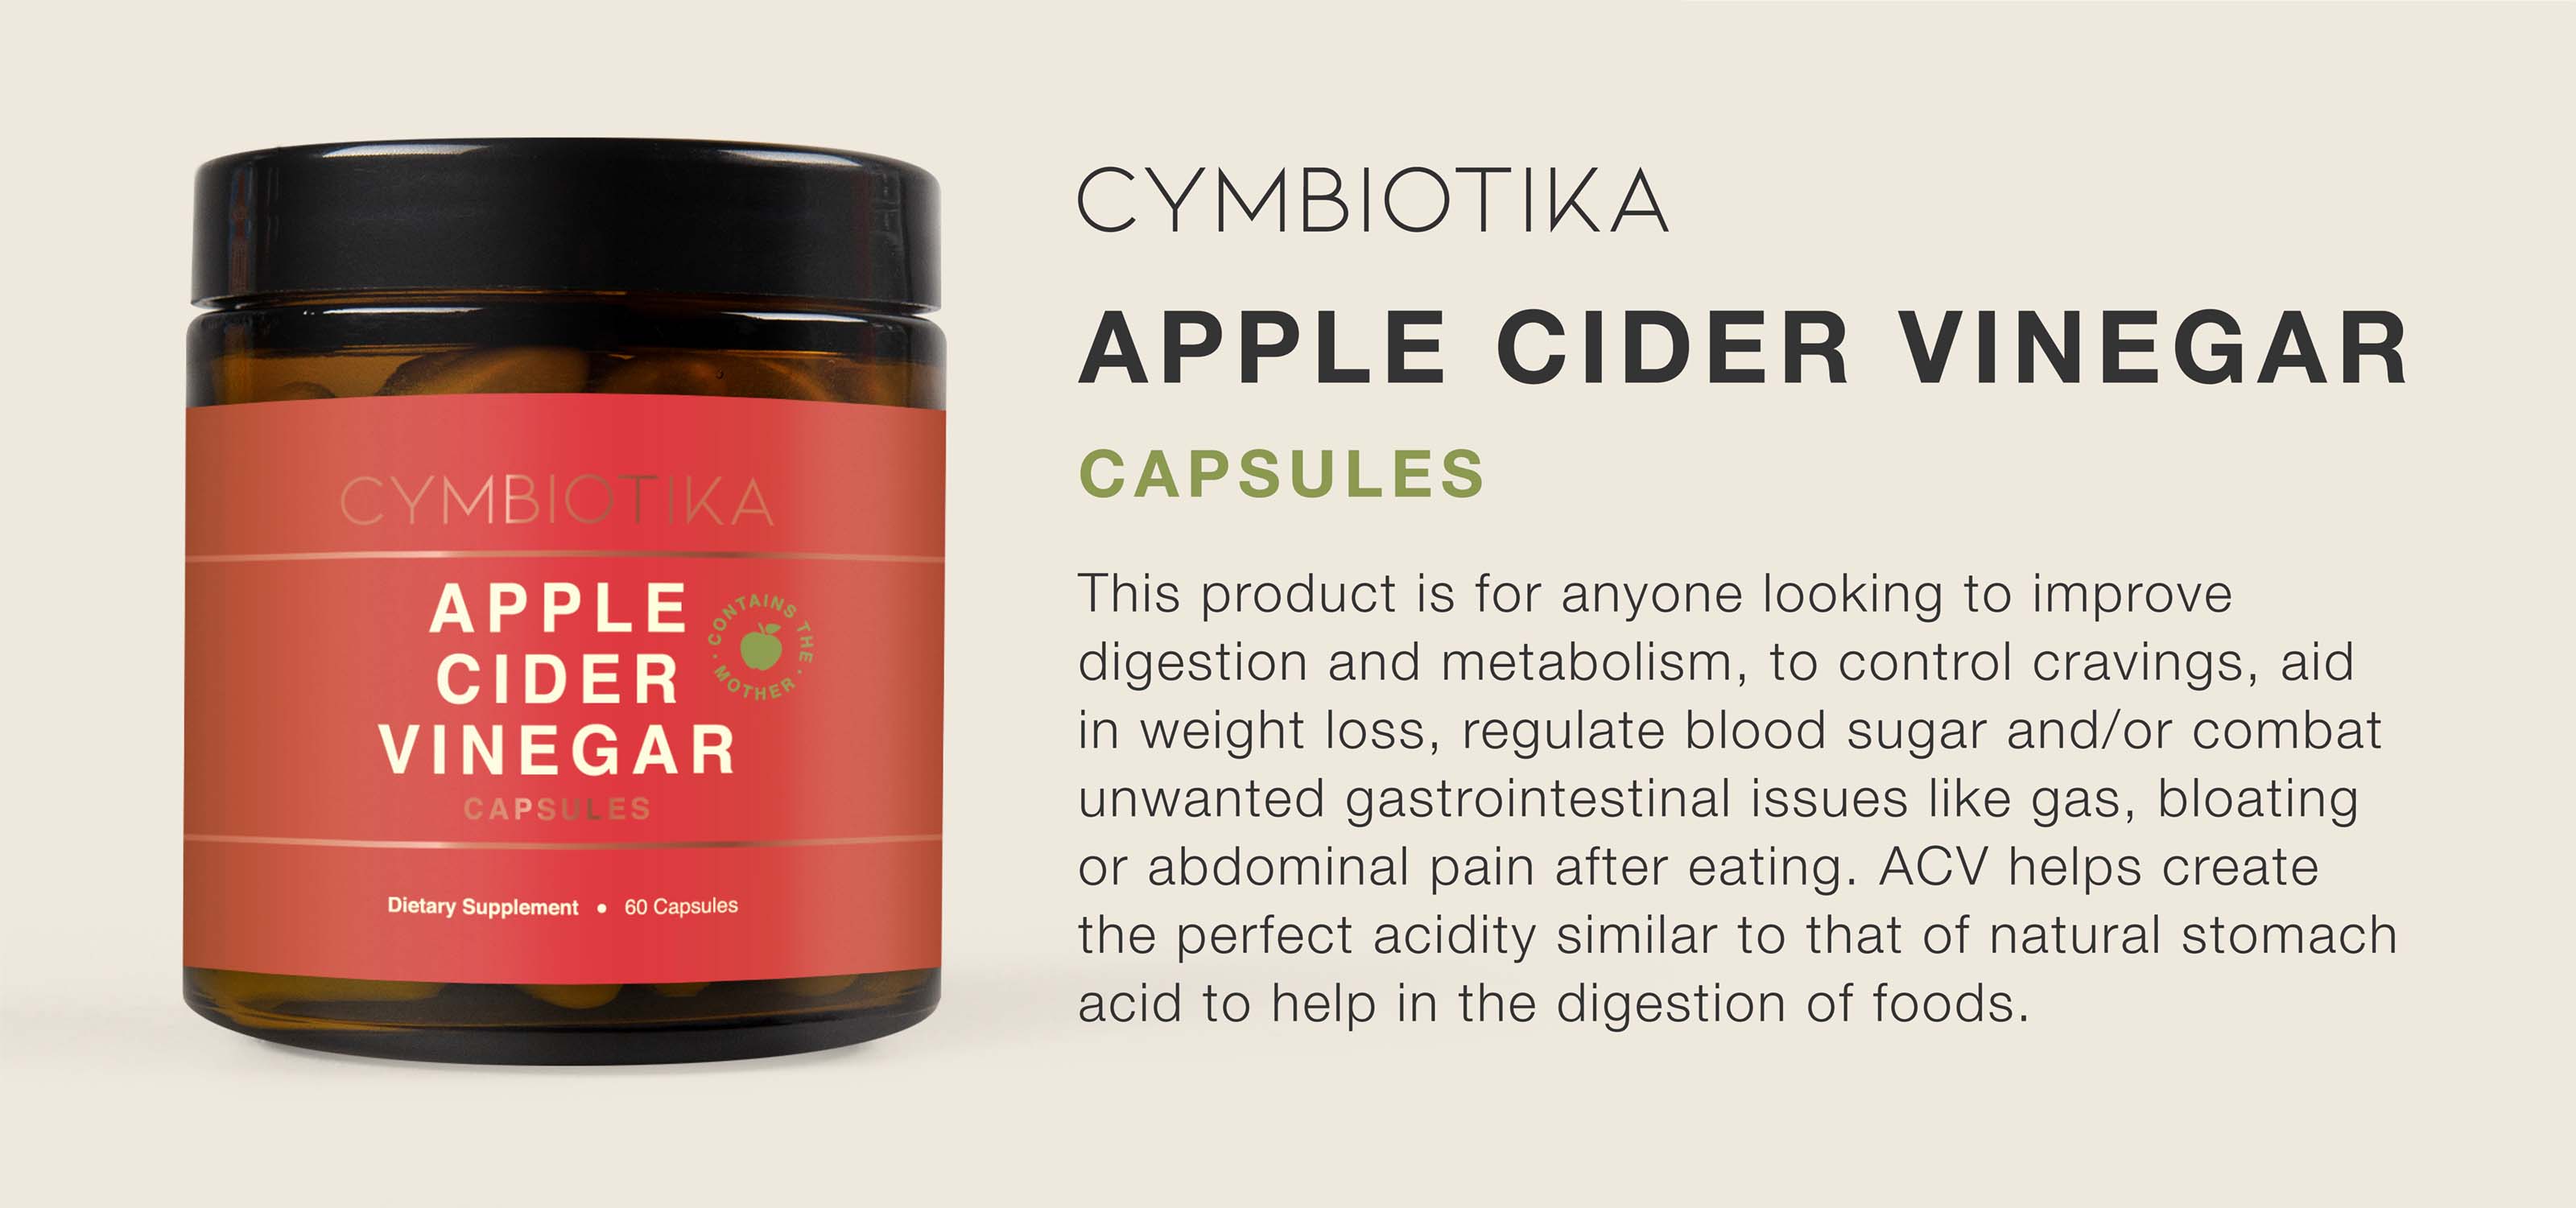 Cymbiotika Apple Cider Vinegar Capsules are for anyone looking to improve digestion and metabolism